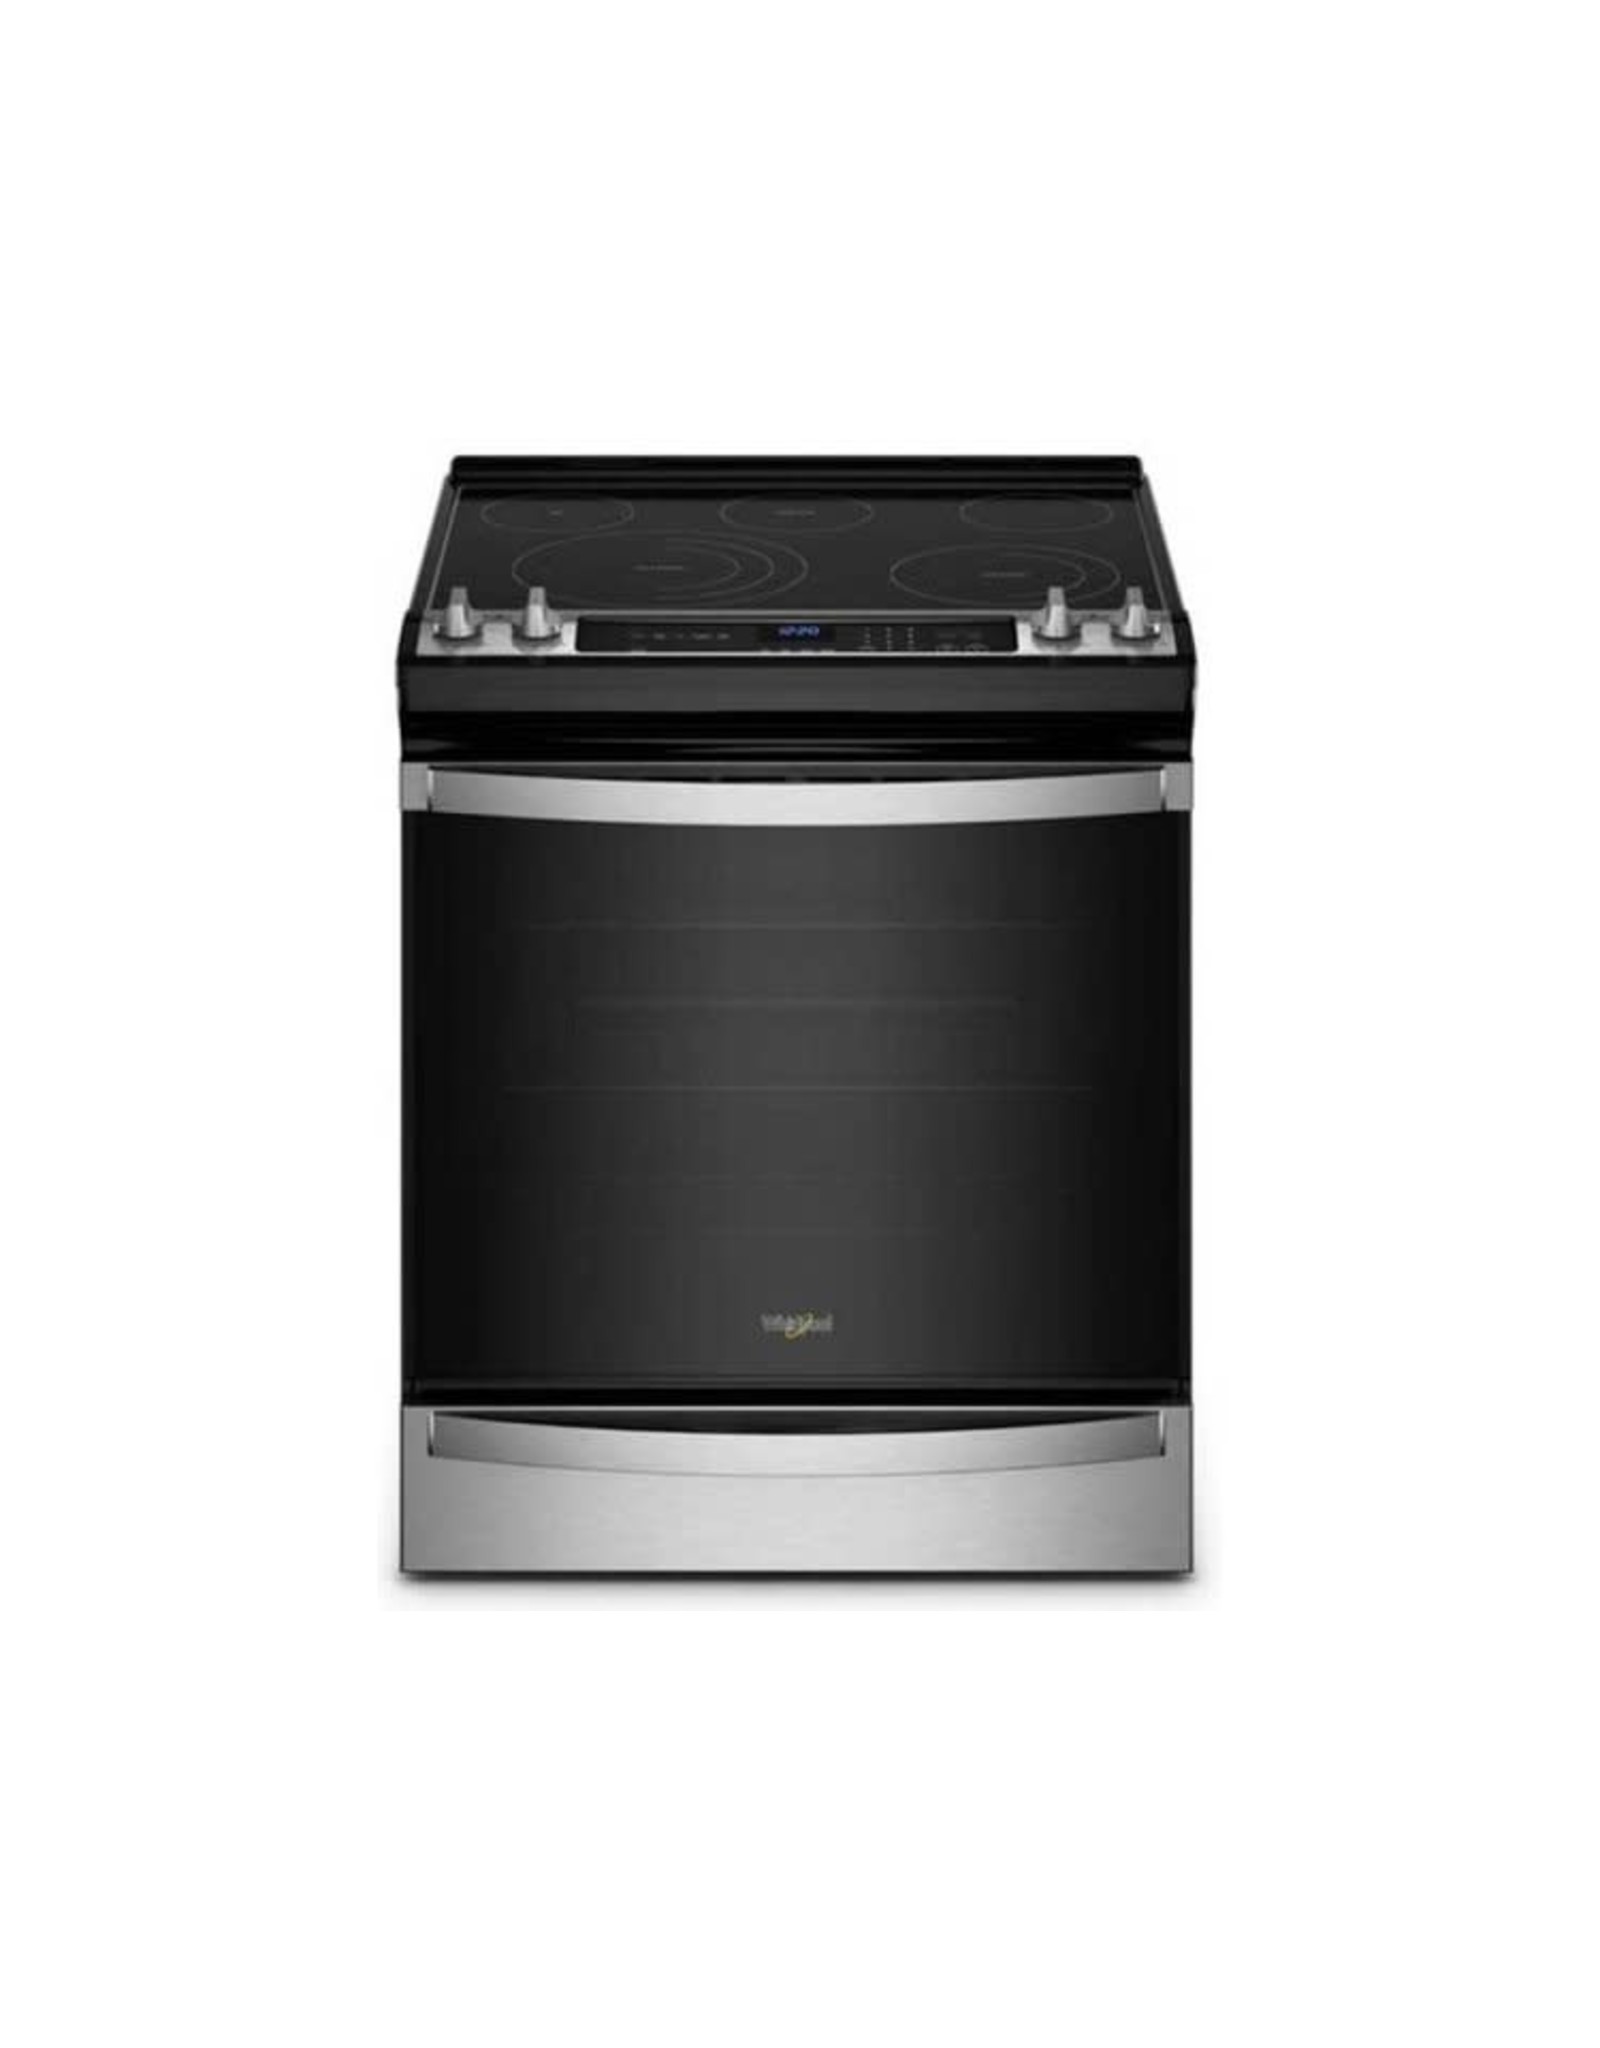 WHIRLPOOL WEE745H0LZ 6.4 cu. ft. Single Oven Electric Range with Air Fry Oven in Fingerprint Resistant Stainless Steel